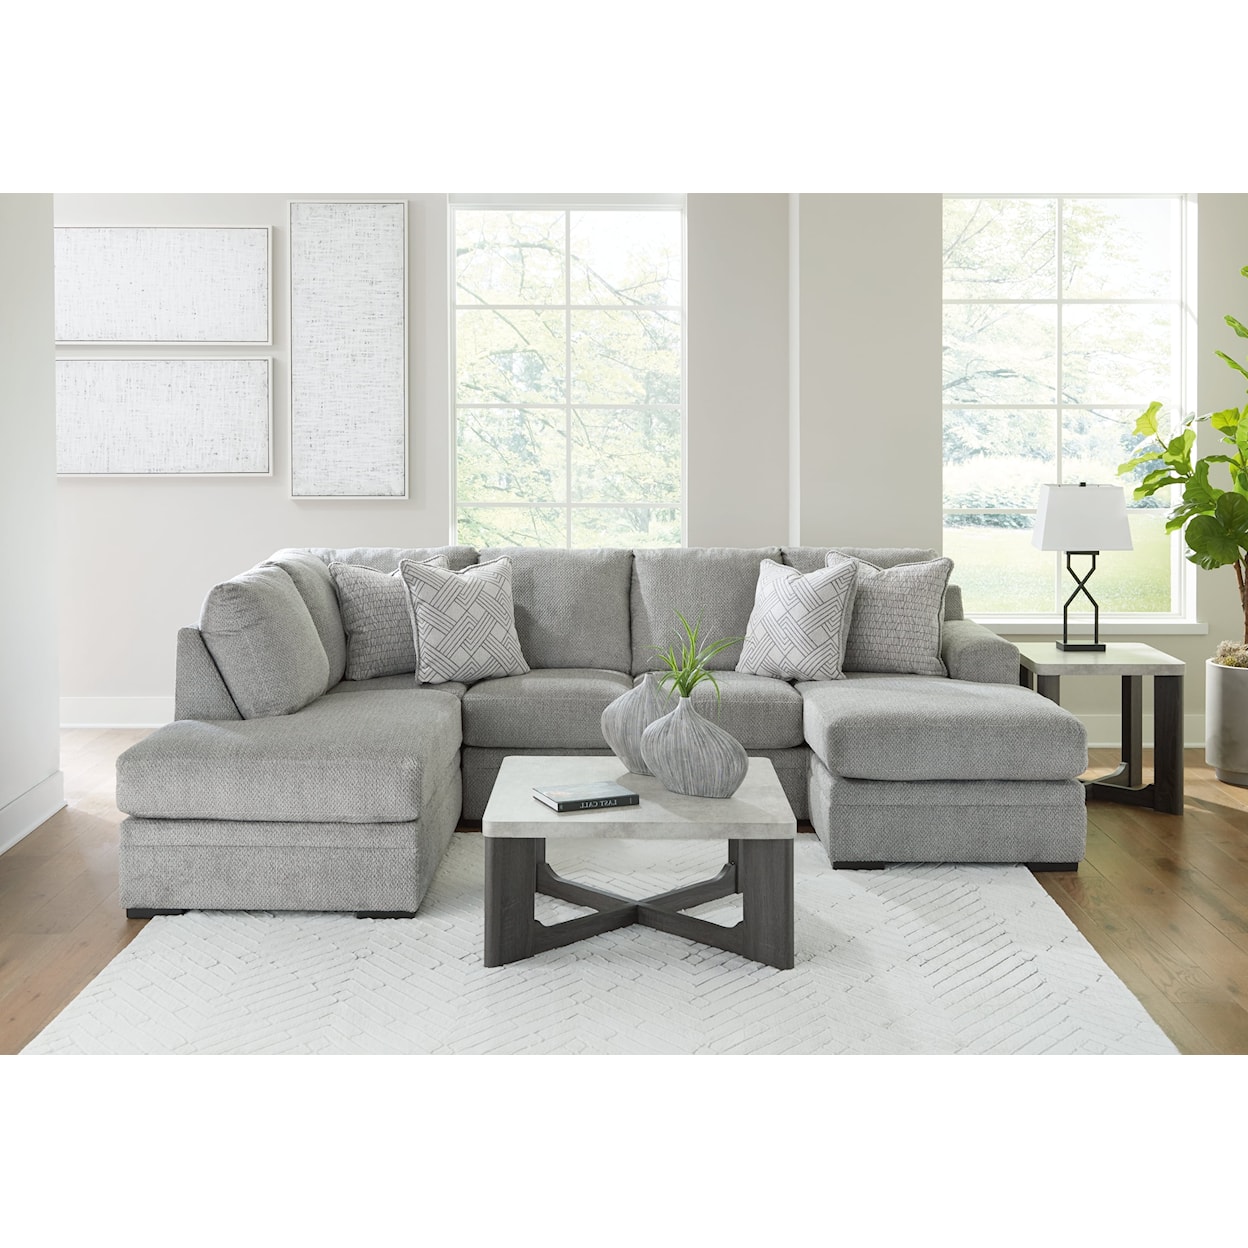 Signature Design by Ashley Furniture Casselbury Sectional